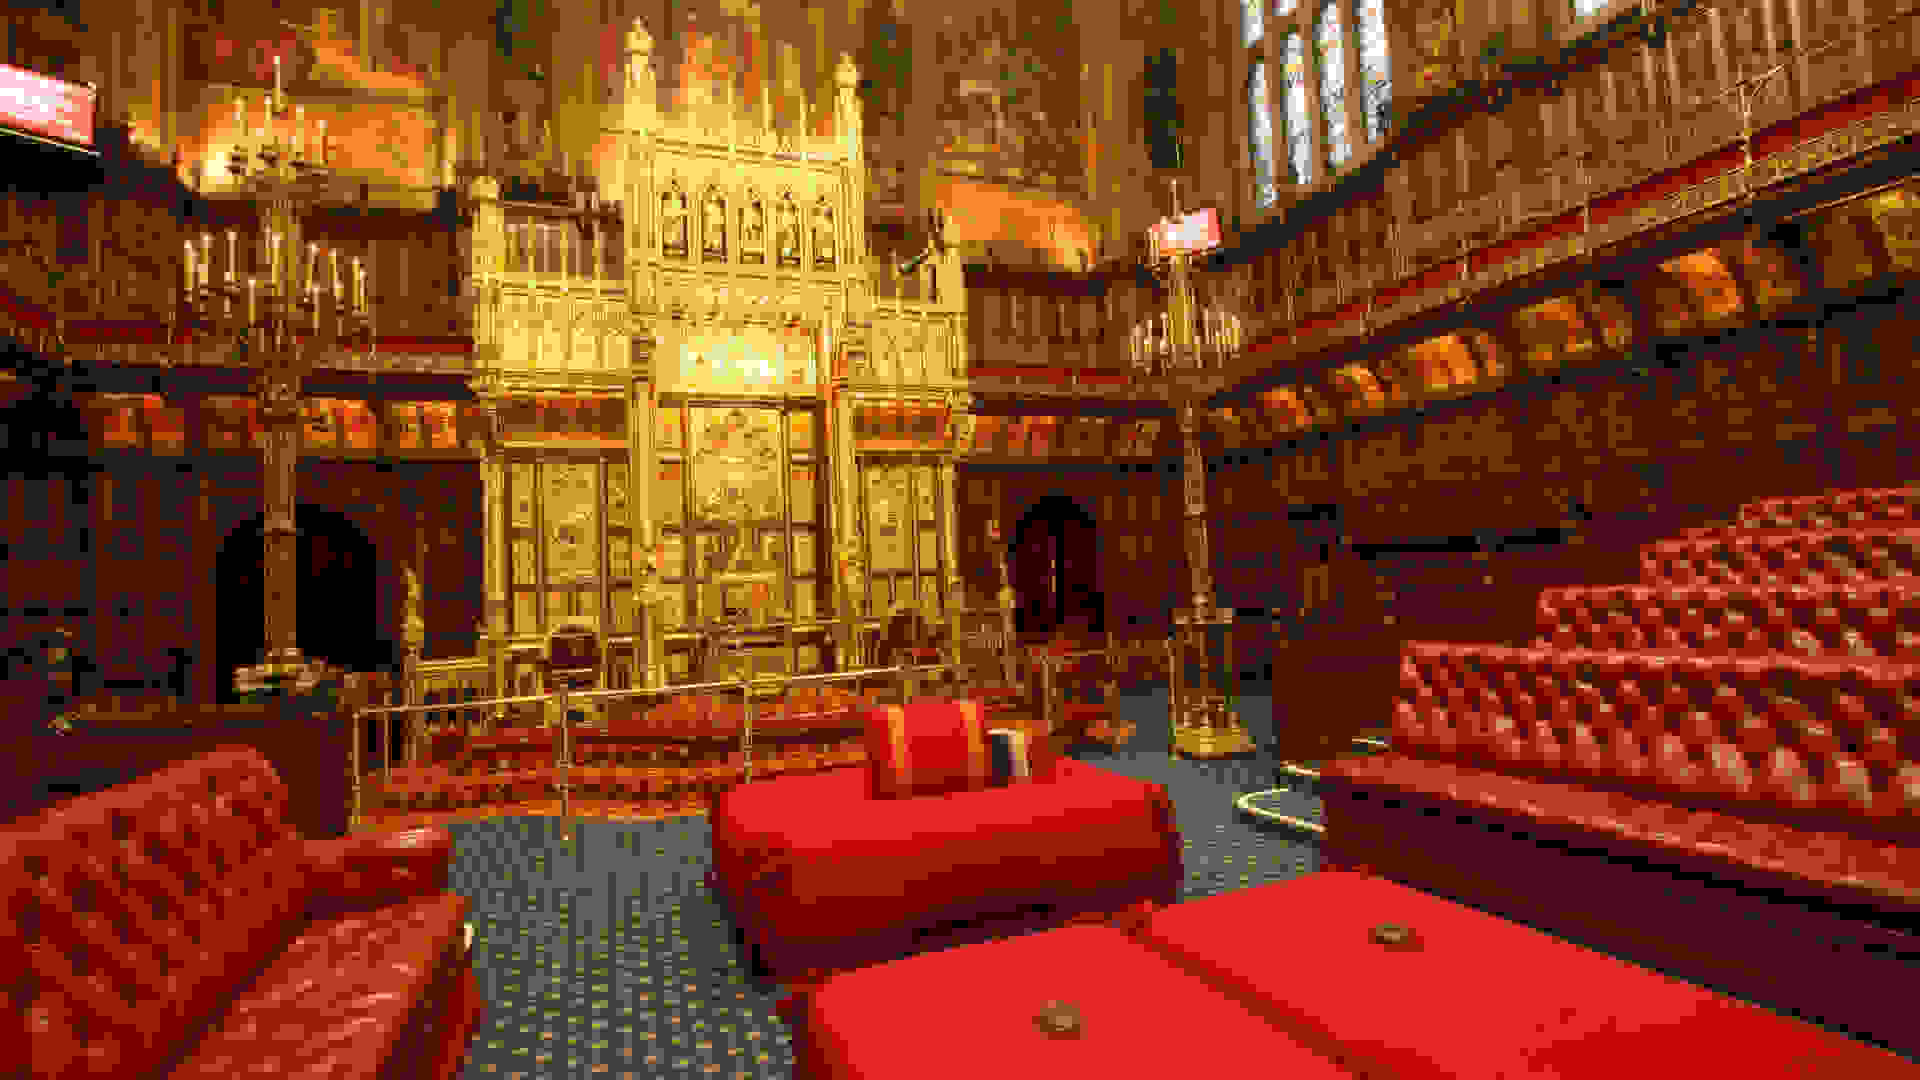 The House of Lords Chamber, UK Houses of Parliament. ©UK House of Lords